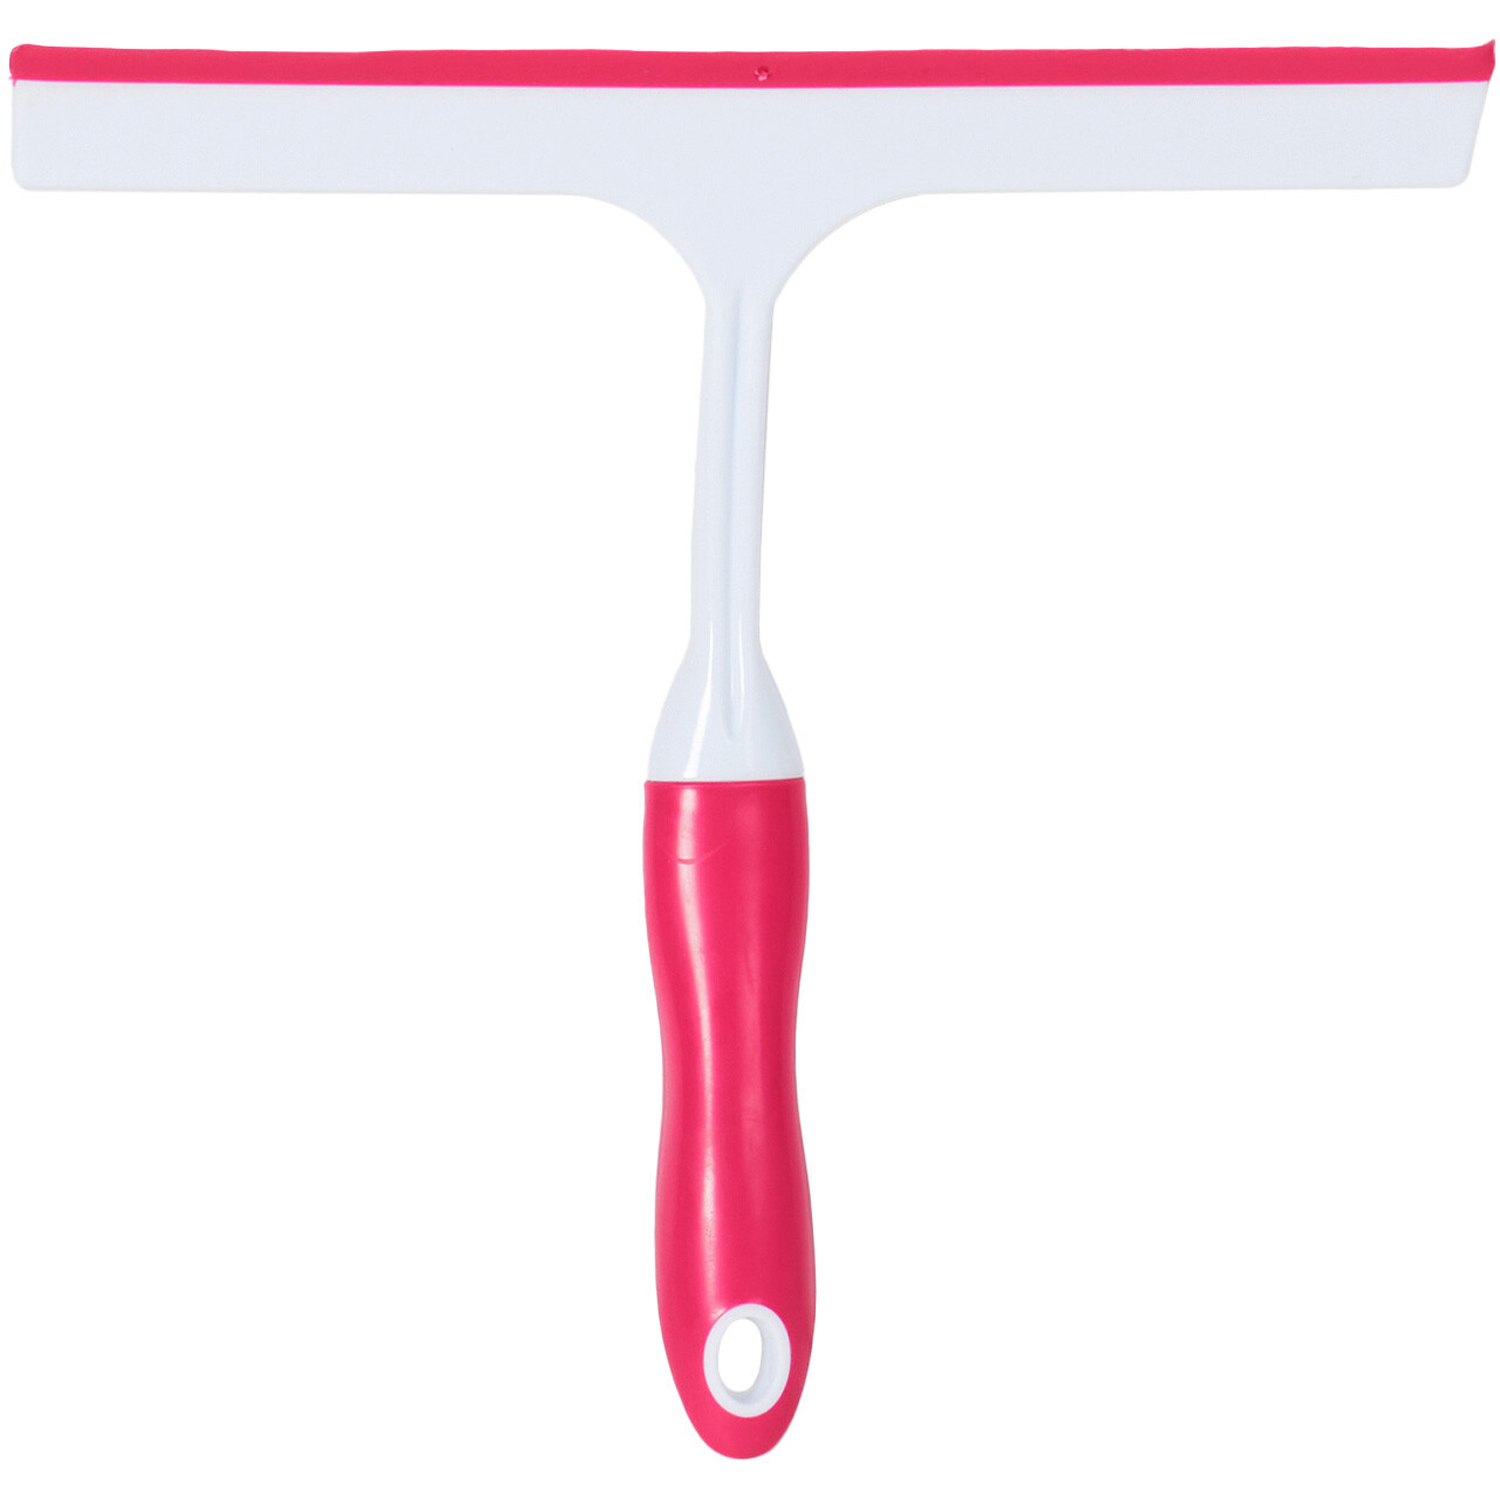 Daisy Pink Squeegee Image 2